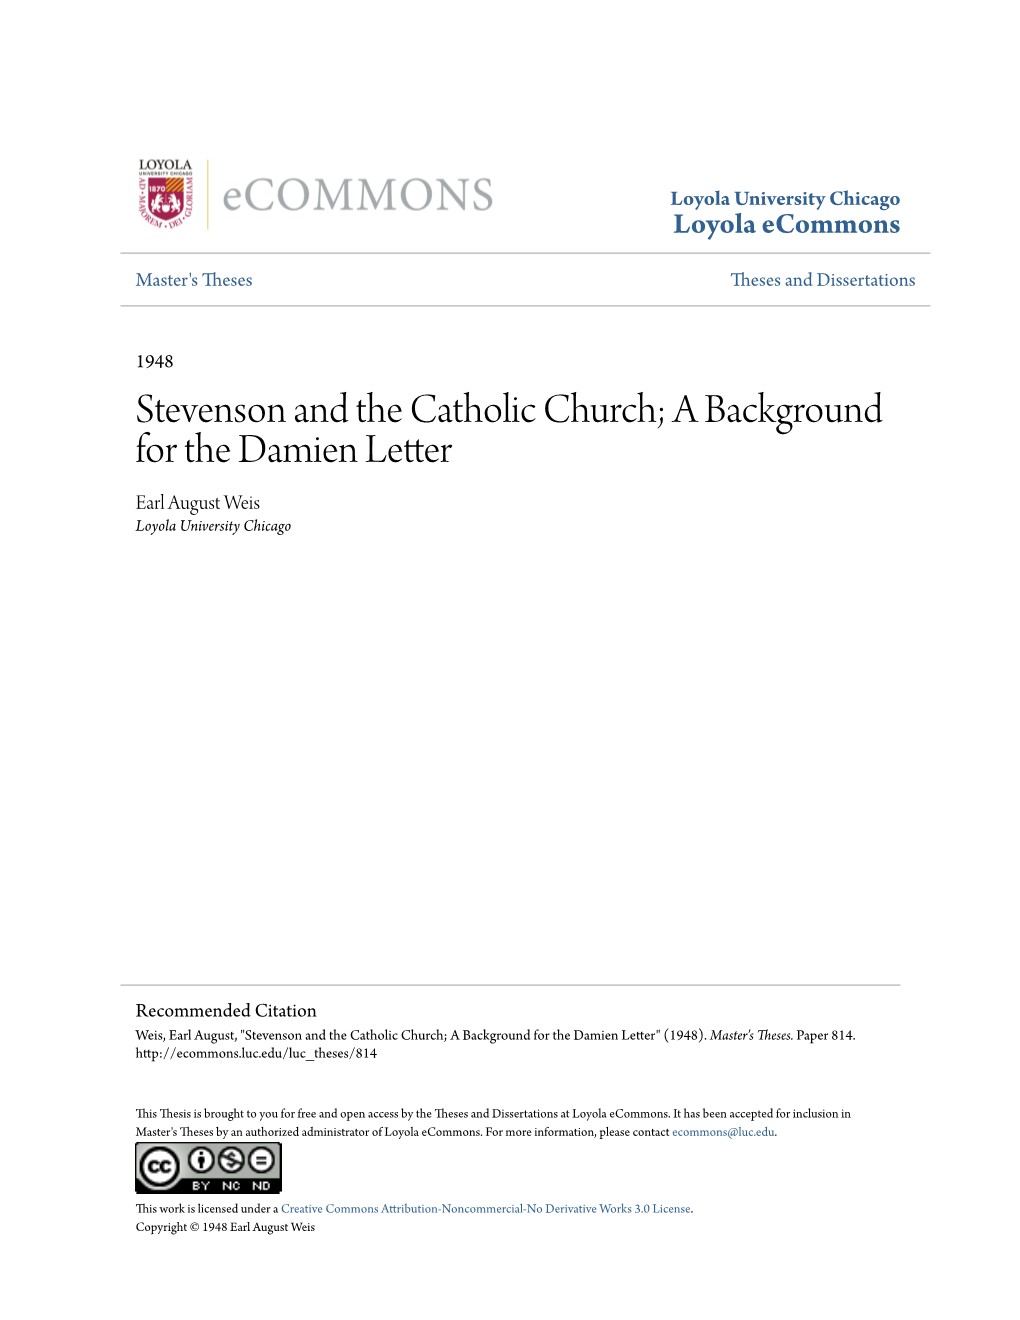 Stevenson and the Catholic Church; a Background for the Damien Letter Earl August Weis Loyola University Chicago